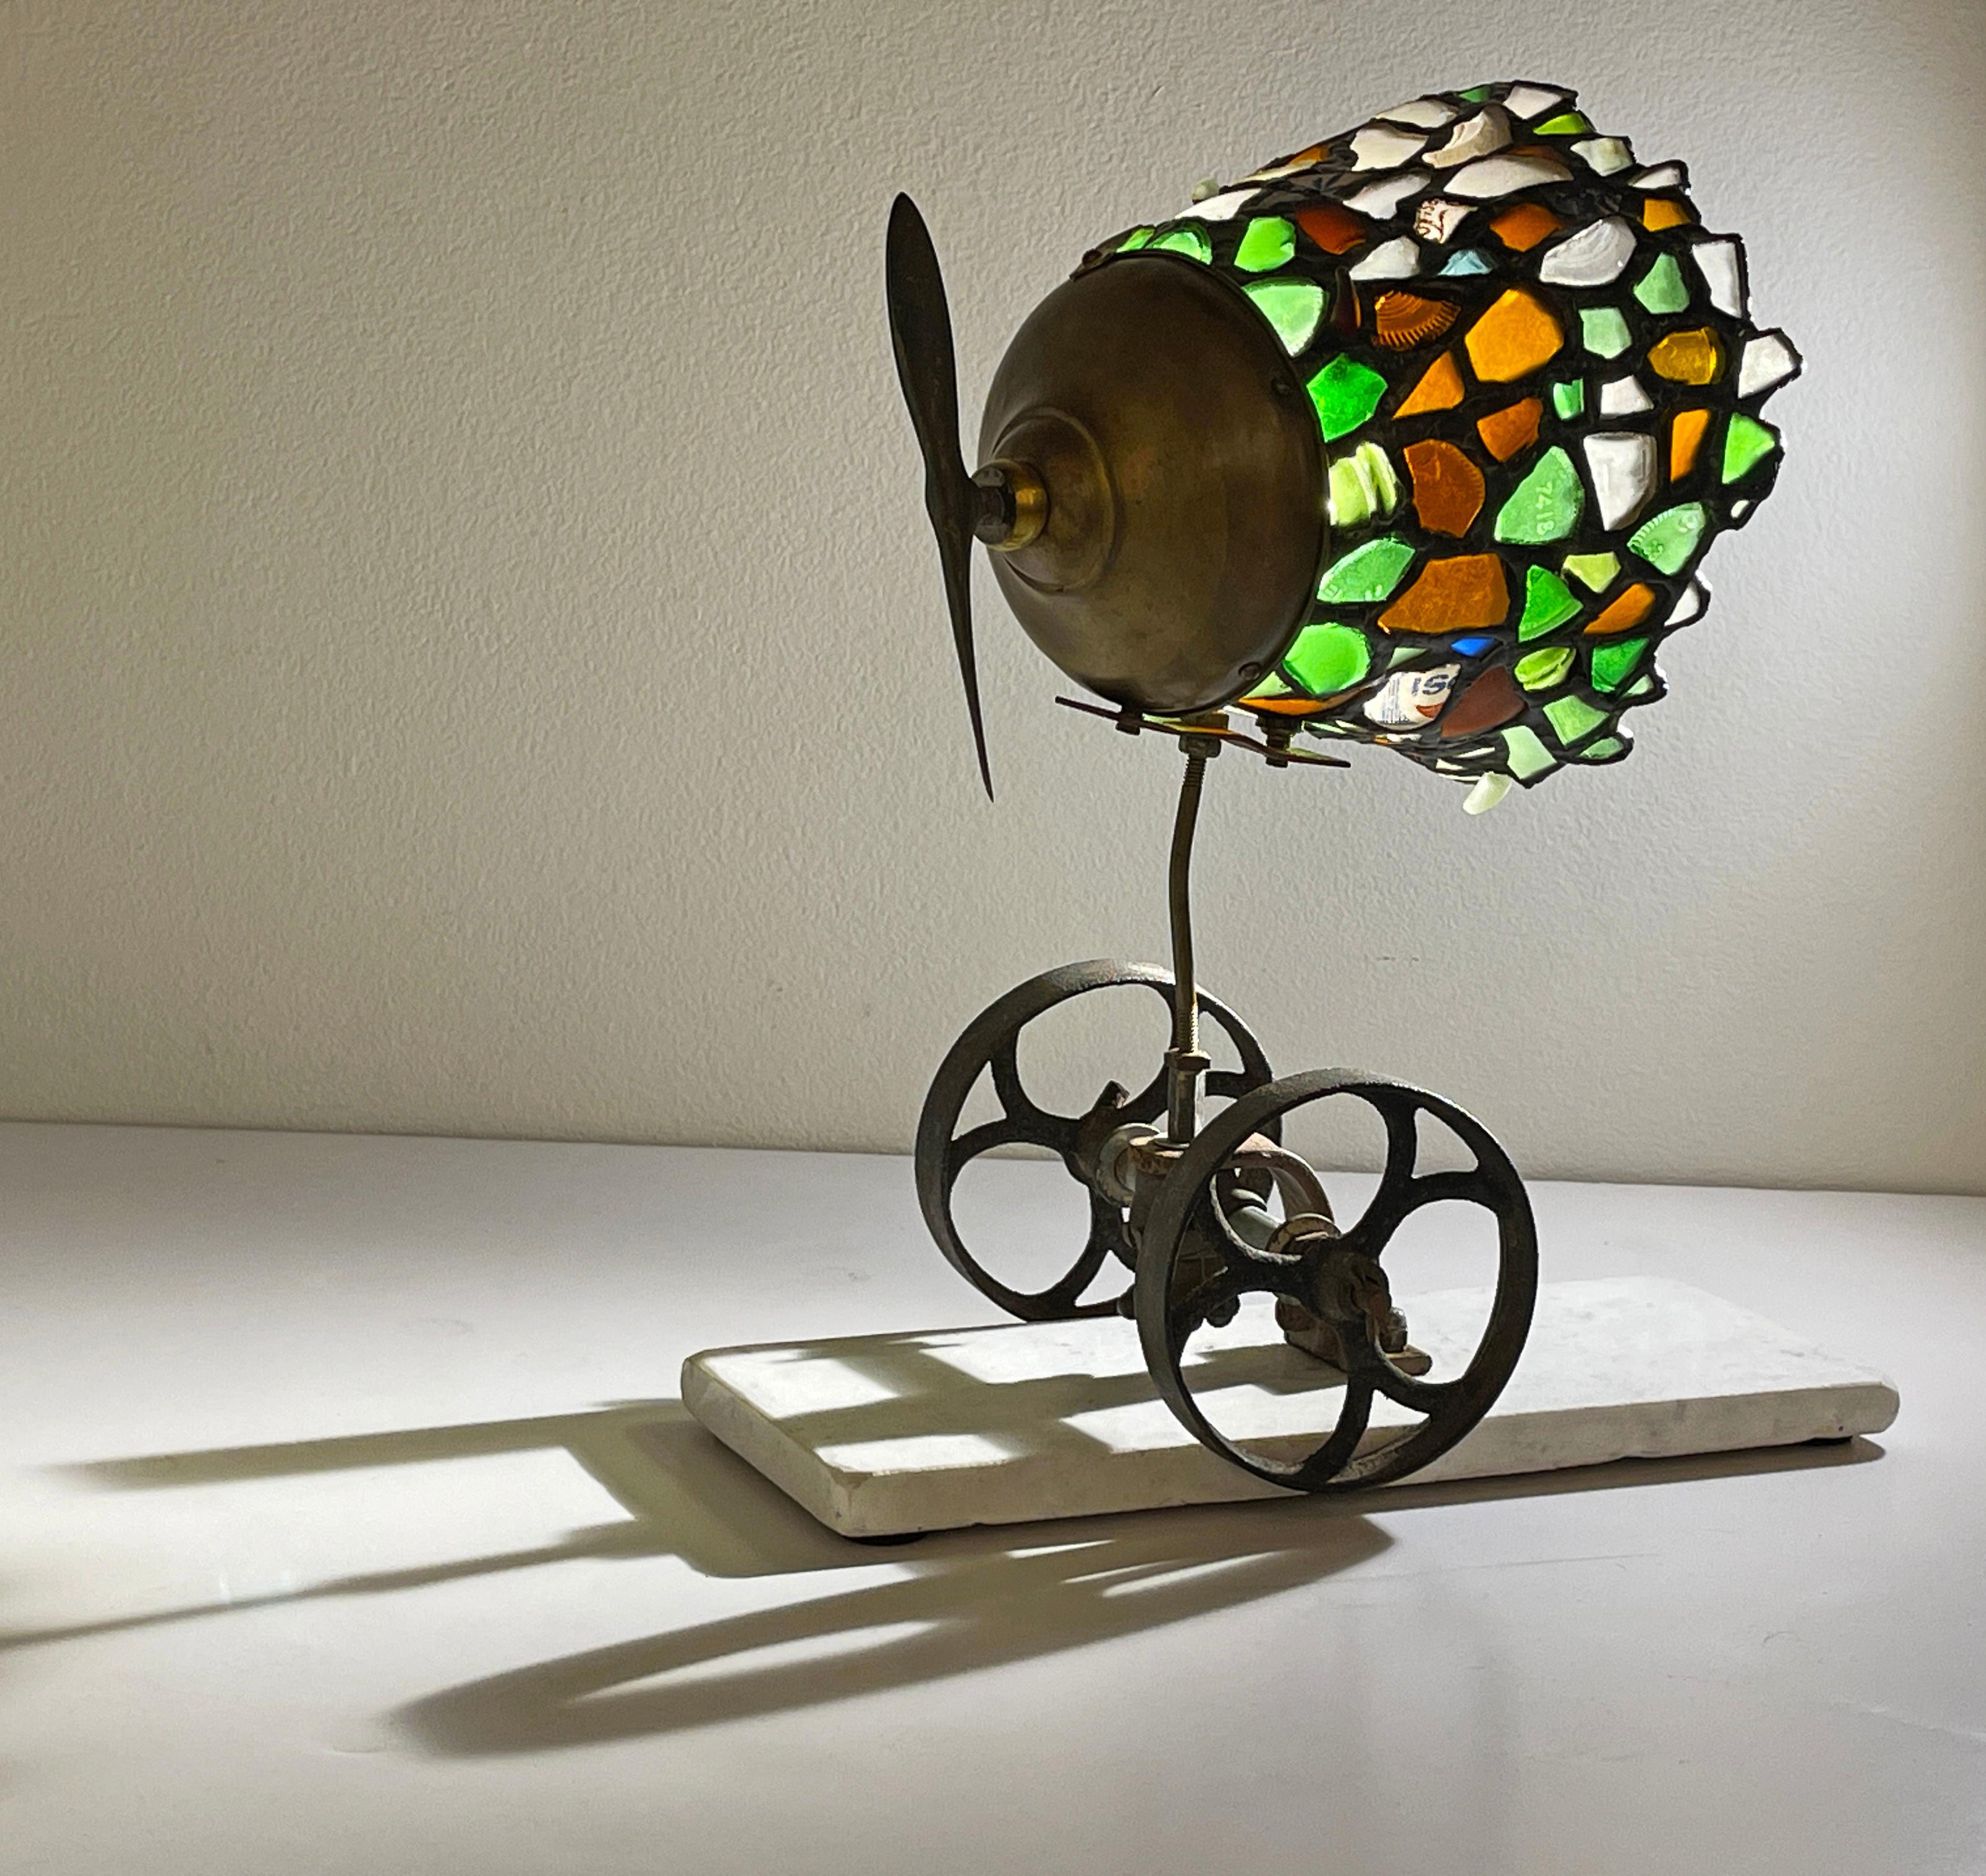 This lamp is made using salvaged Lake Michigan beach glass assembled with found objects to create this surreal and totally unique object. The artist uses the same time-honored copper foil technique employed in the creation of Tiffany lamps to obtain